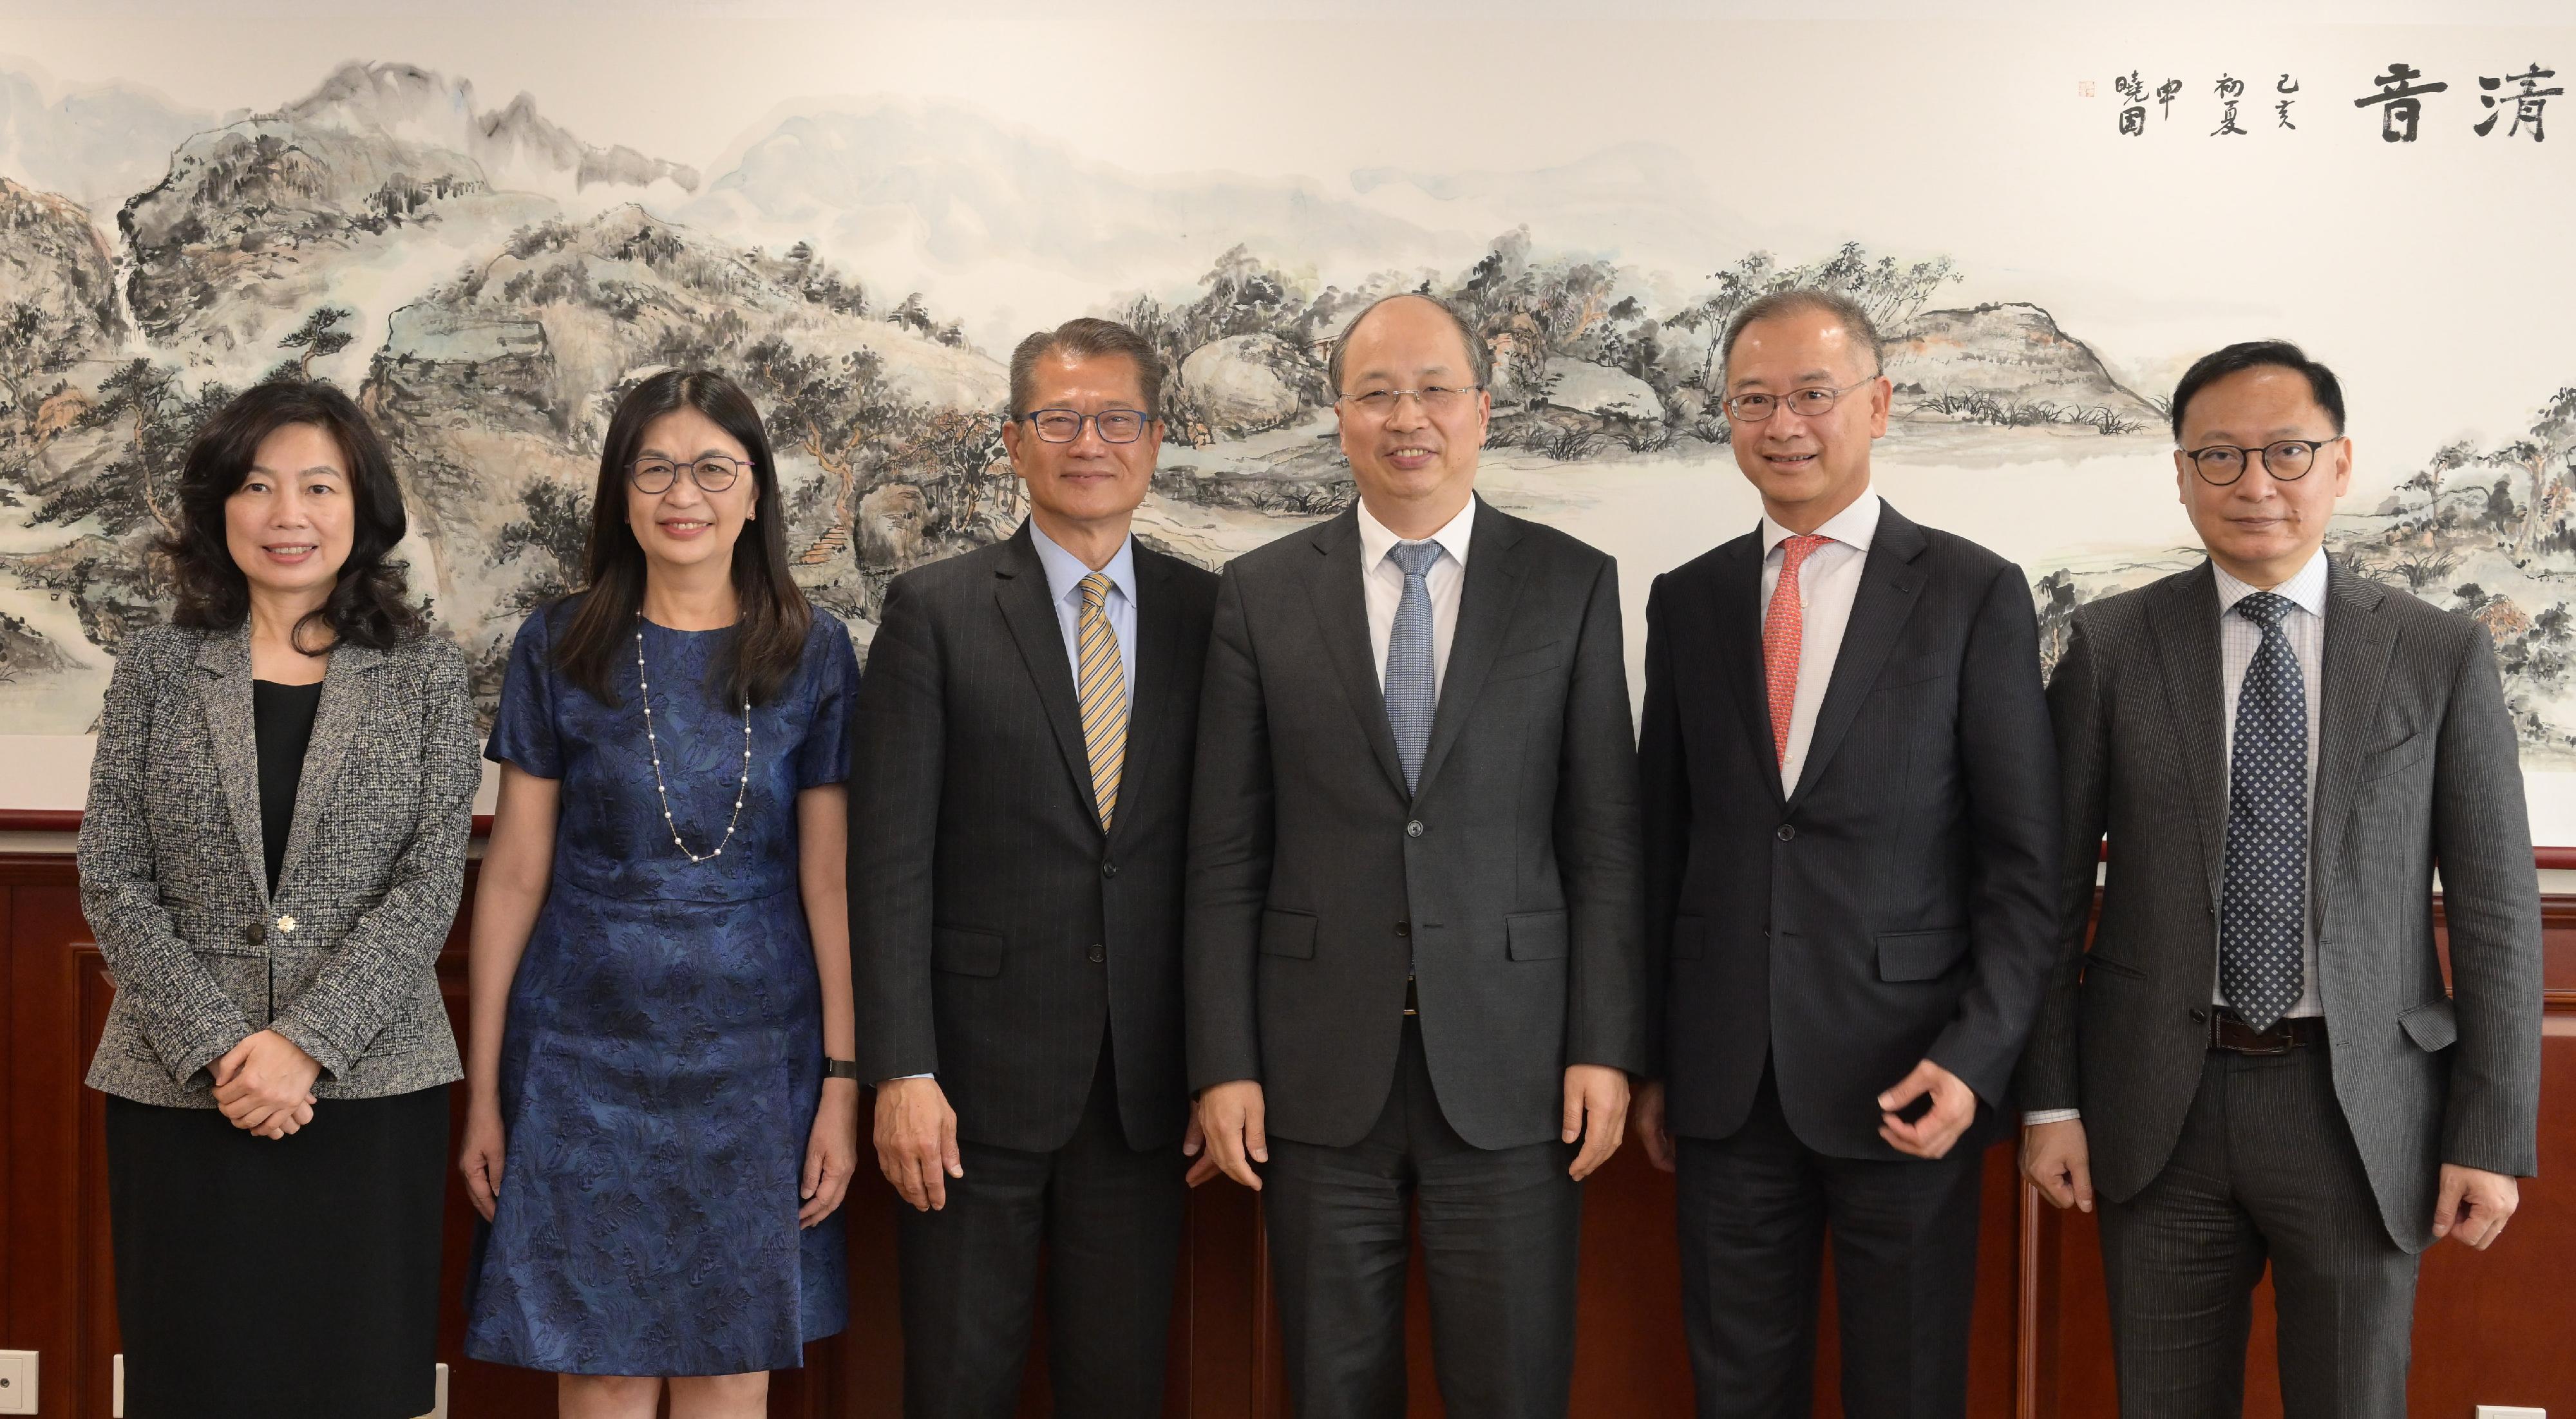 The Financial Secretary, Mr Paul Chan, continues his visit in Beijing today (April 19) and meets the Chairman of the China Securities Regulatory Commission, Mr Yi Huiman, to explore ways to enhance co-ordination and co-operation in financial aspect. Photo shows Mr Chan (third left); Mr Yi (third right); the Permanent Secretary for Financial Services and the Treasury (Financial Services), Ms Salina Yan (first left); the Chief Executive of the Hong Kong Monetary Authority, Mr Eddie Yue (second right); the Chief Executive Officer of the Securities and Futures Commission, Ms Julia Leung (second left); and the Chief Executive Officer of the Insurance Authority, Mr Clement Cheung (first right), before the meeting.